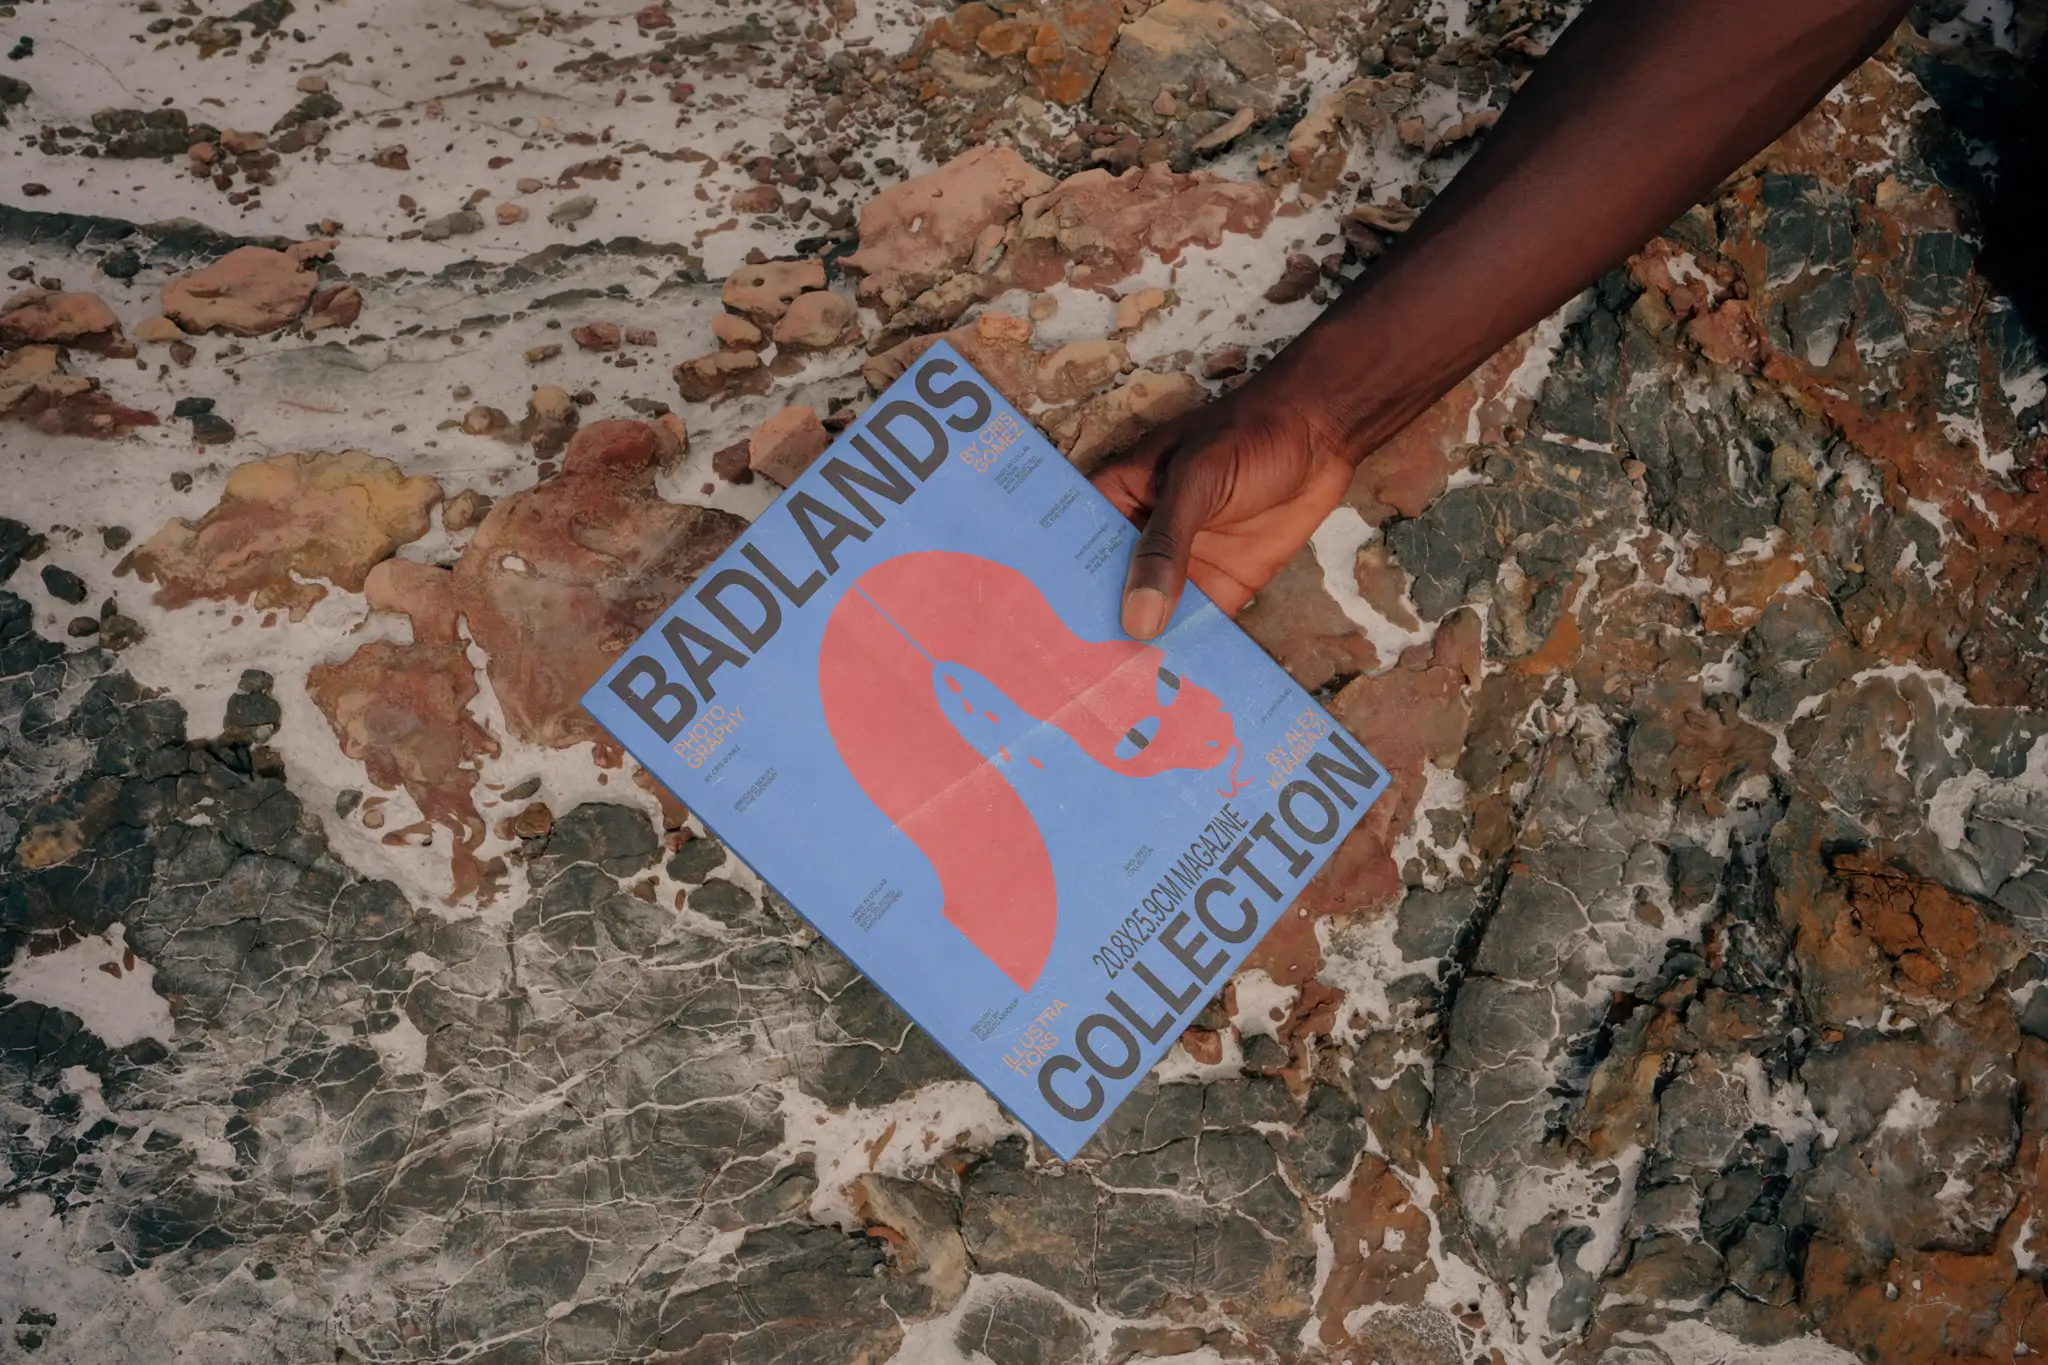 A hand from a black guy holding a magazine mock-up over a rocky surface